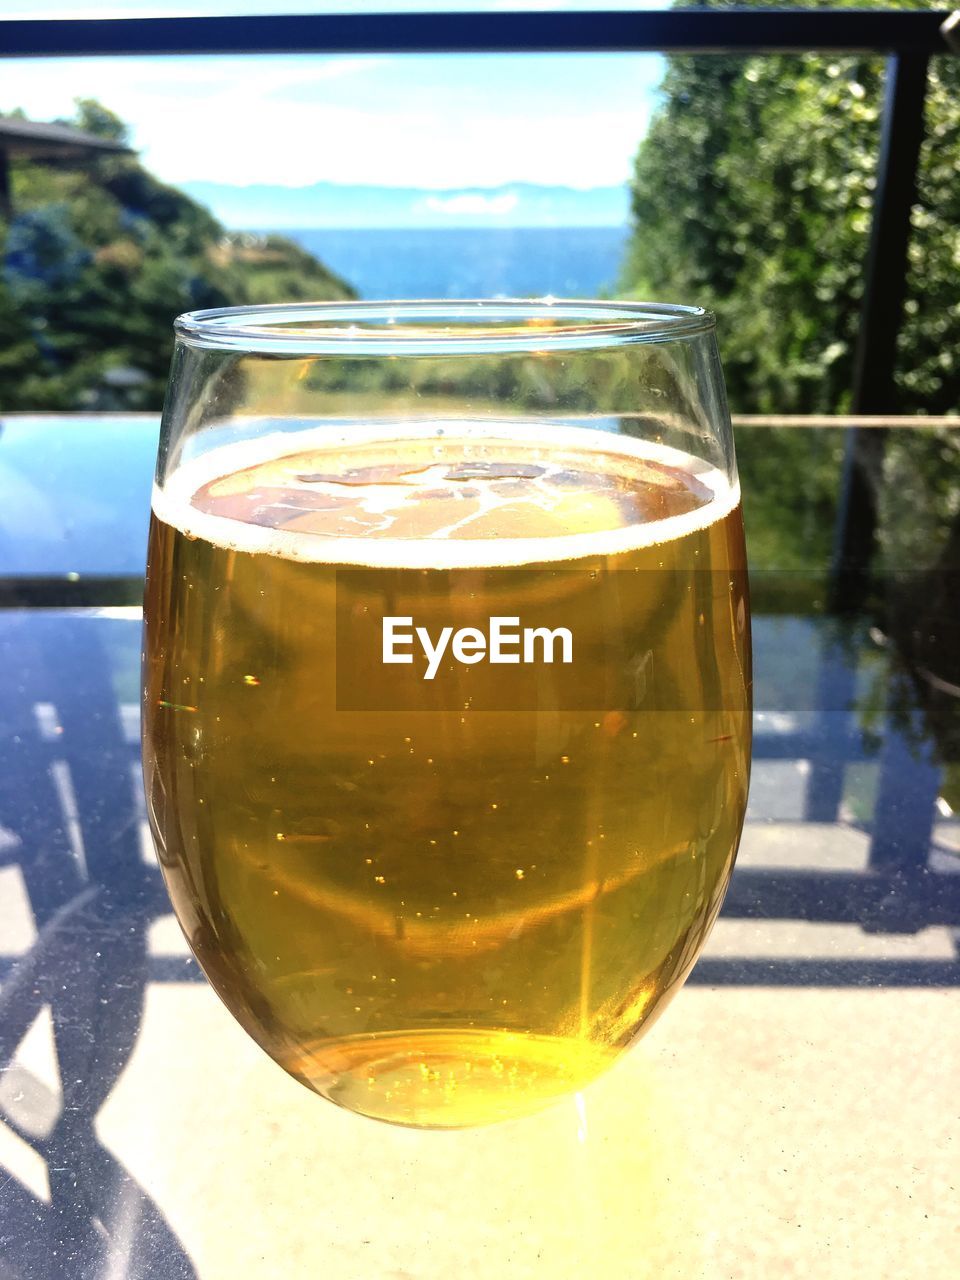 CLOSE-UP OF BEER IN GLASS ON TABLE AGAINST TREES